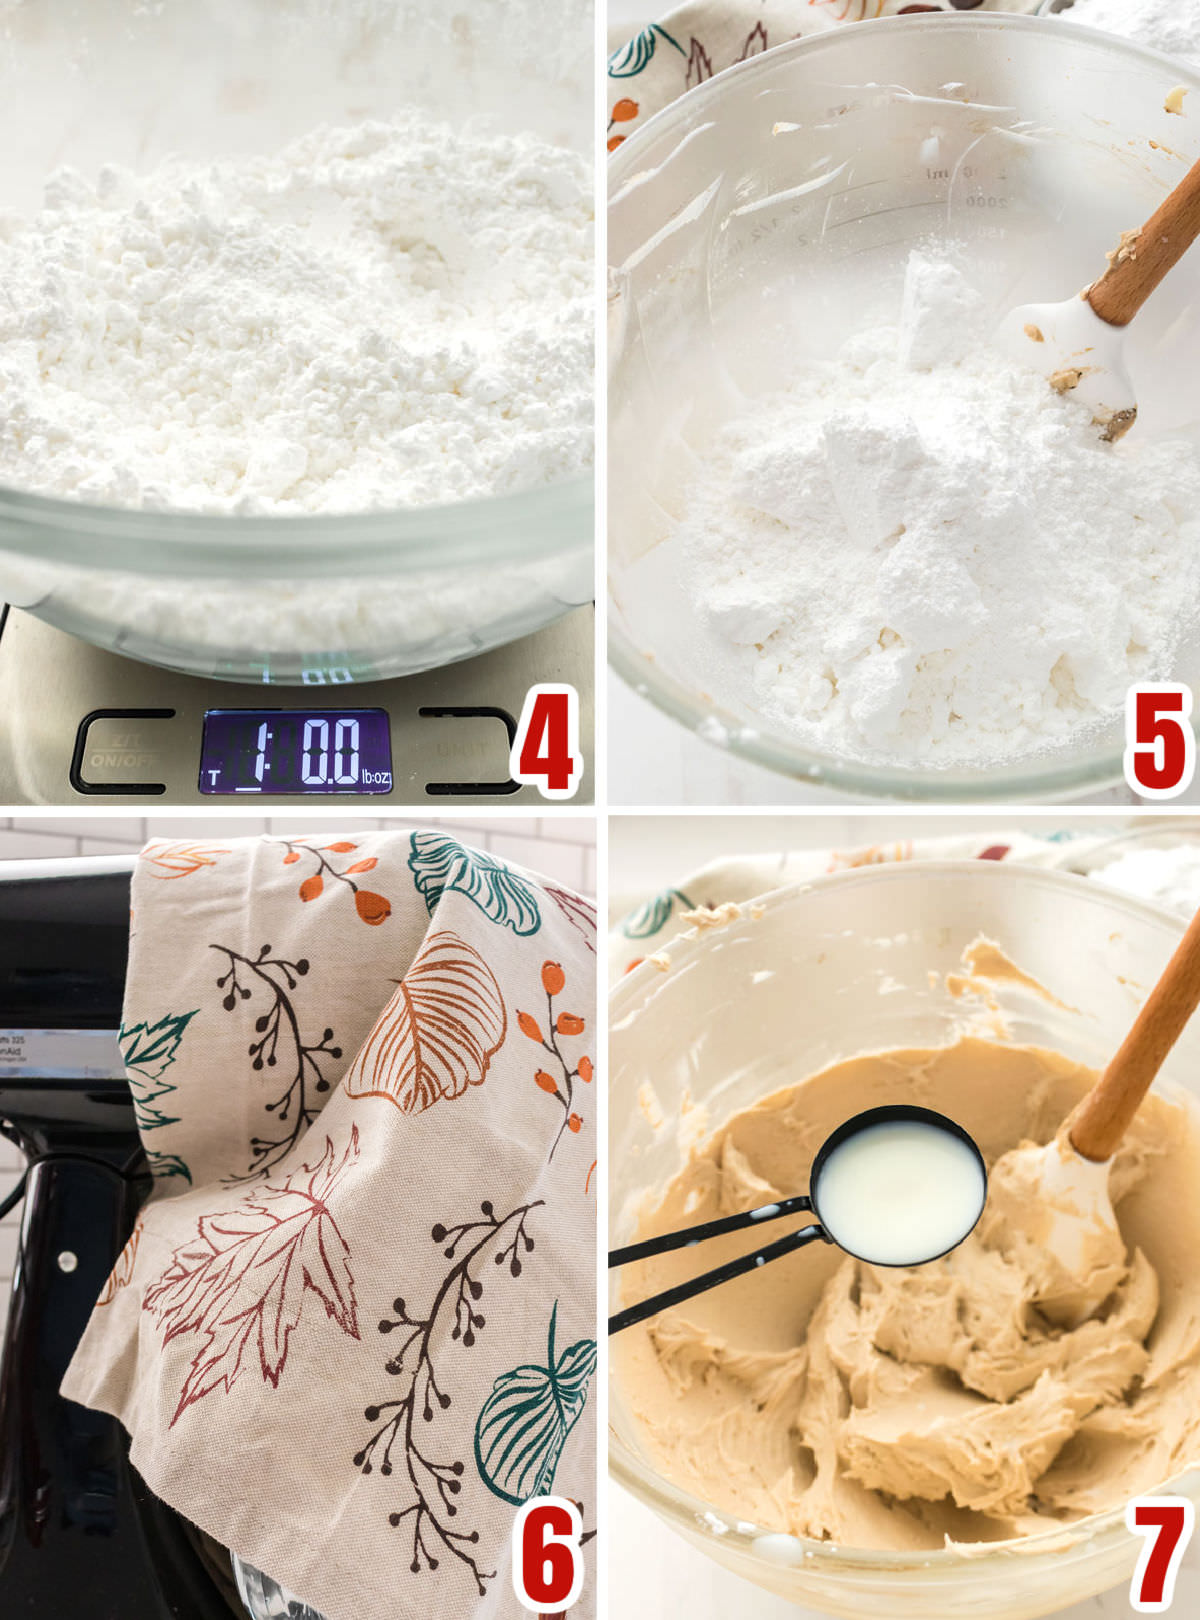 Collage image showing the steps for adding powdered sugar to the Maple Frosting.